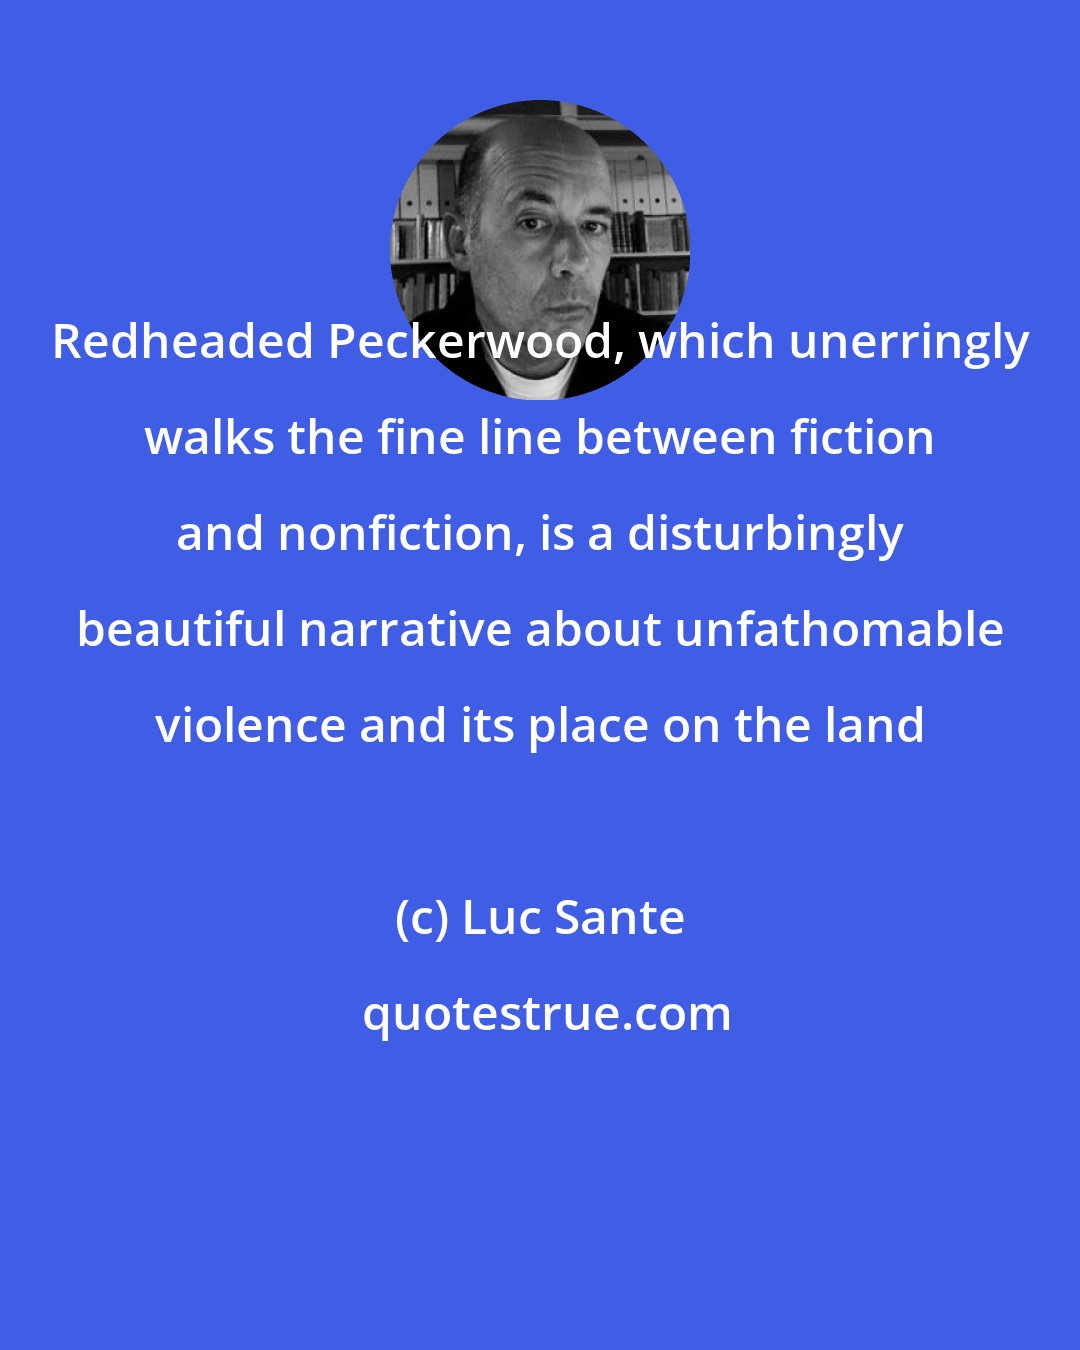 Luc Sante: Redheaded Peckerwood, which unerringly walks the fine line between fiction and nonfiction, is a disturbingly beautiful narrative about unfathomable violence and its place on the land